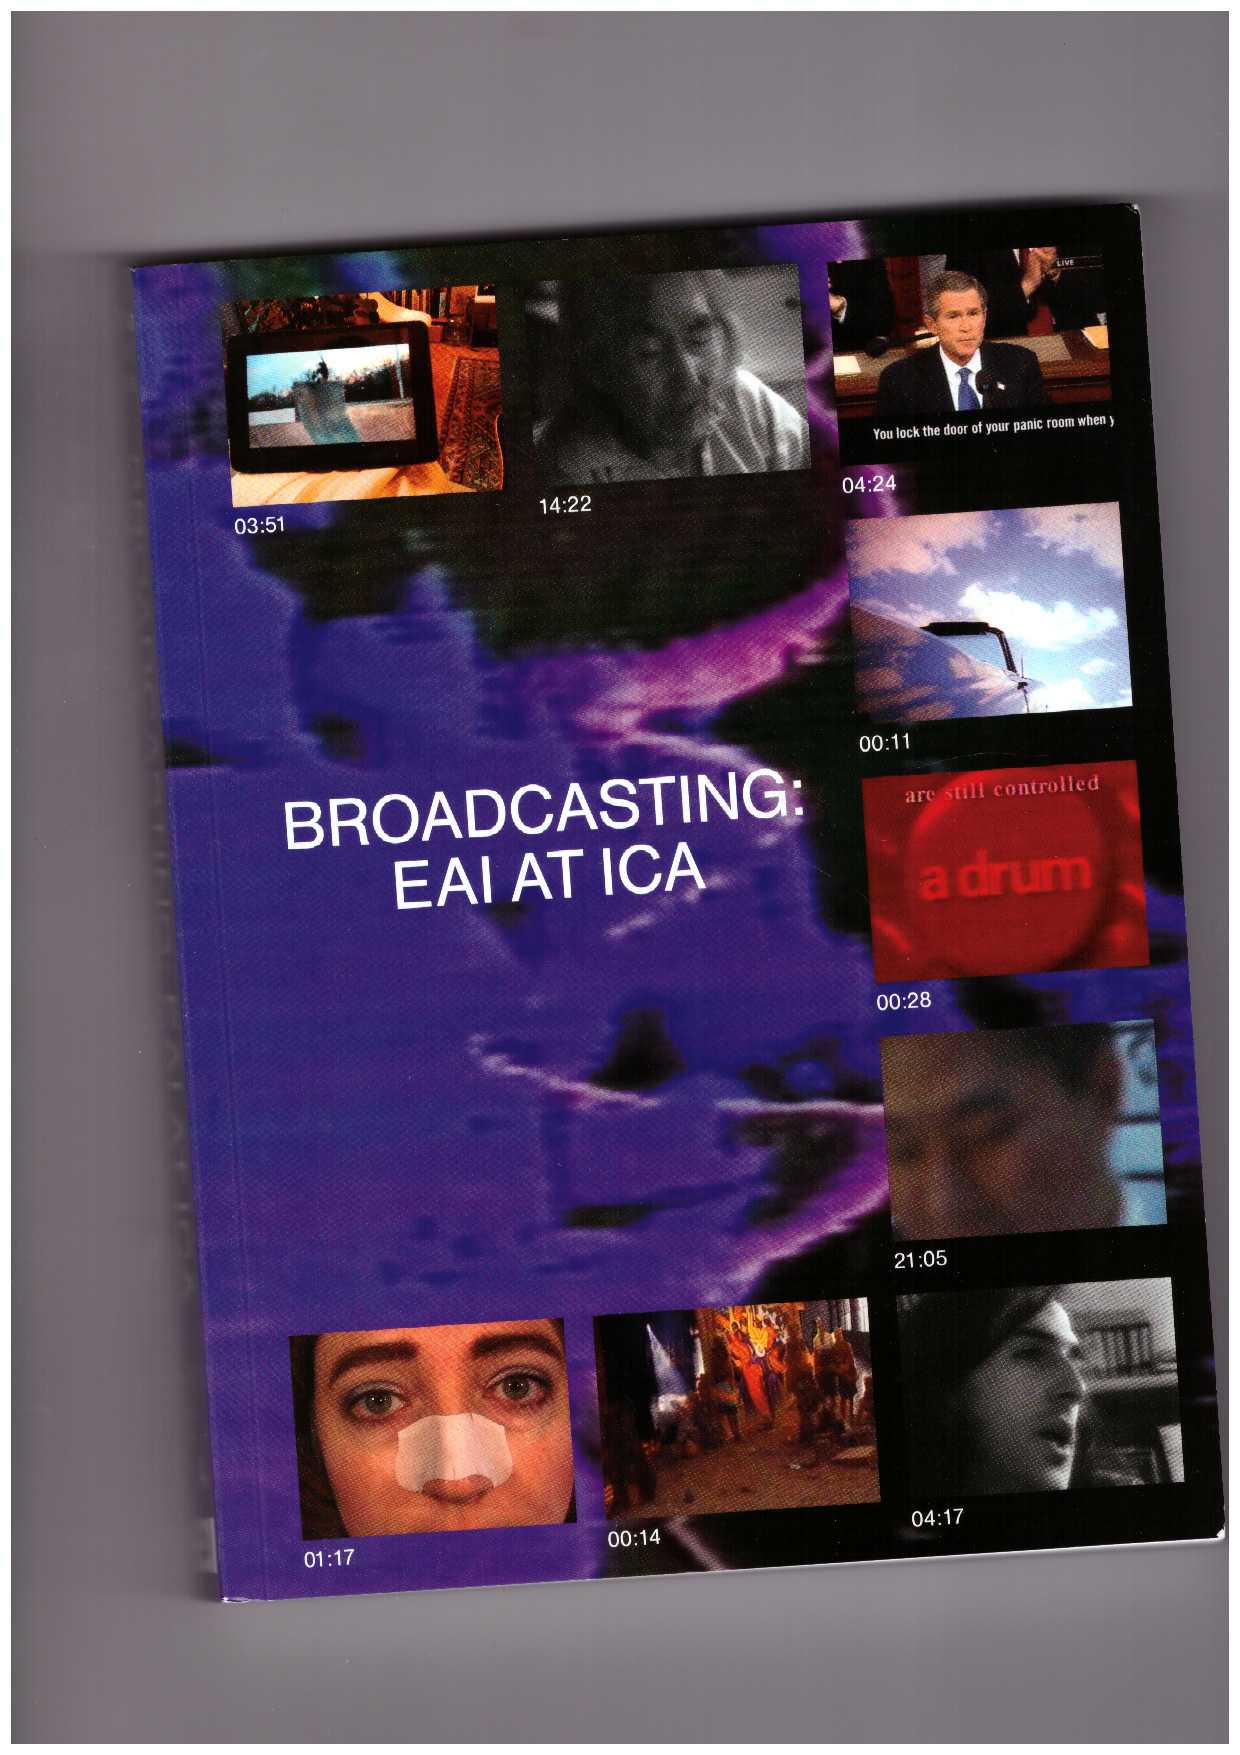  CLEMAN, Rebecca; KLEIN, Alex (eds.) - Broadcasting: EAI at ICA